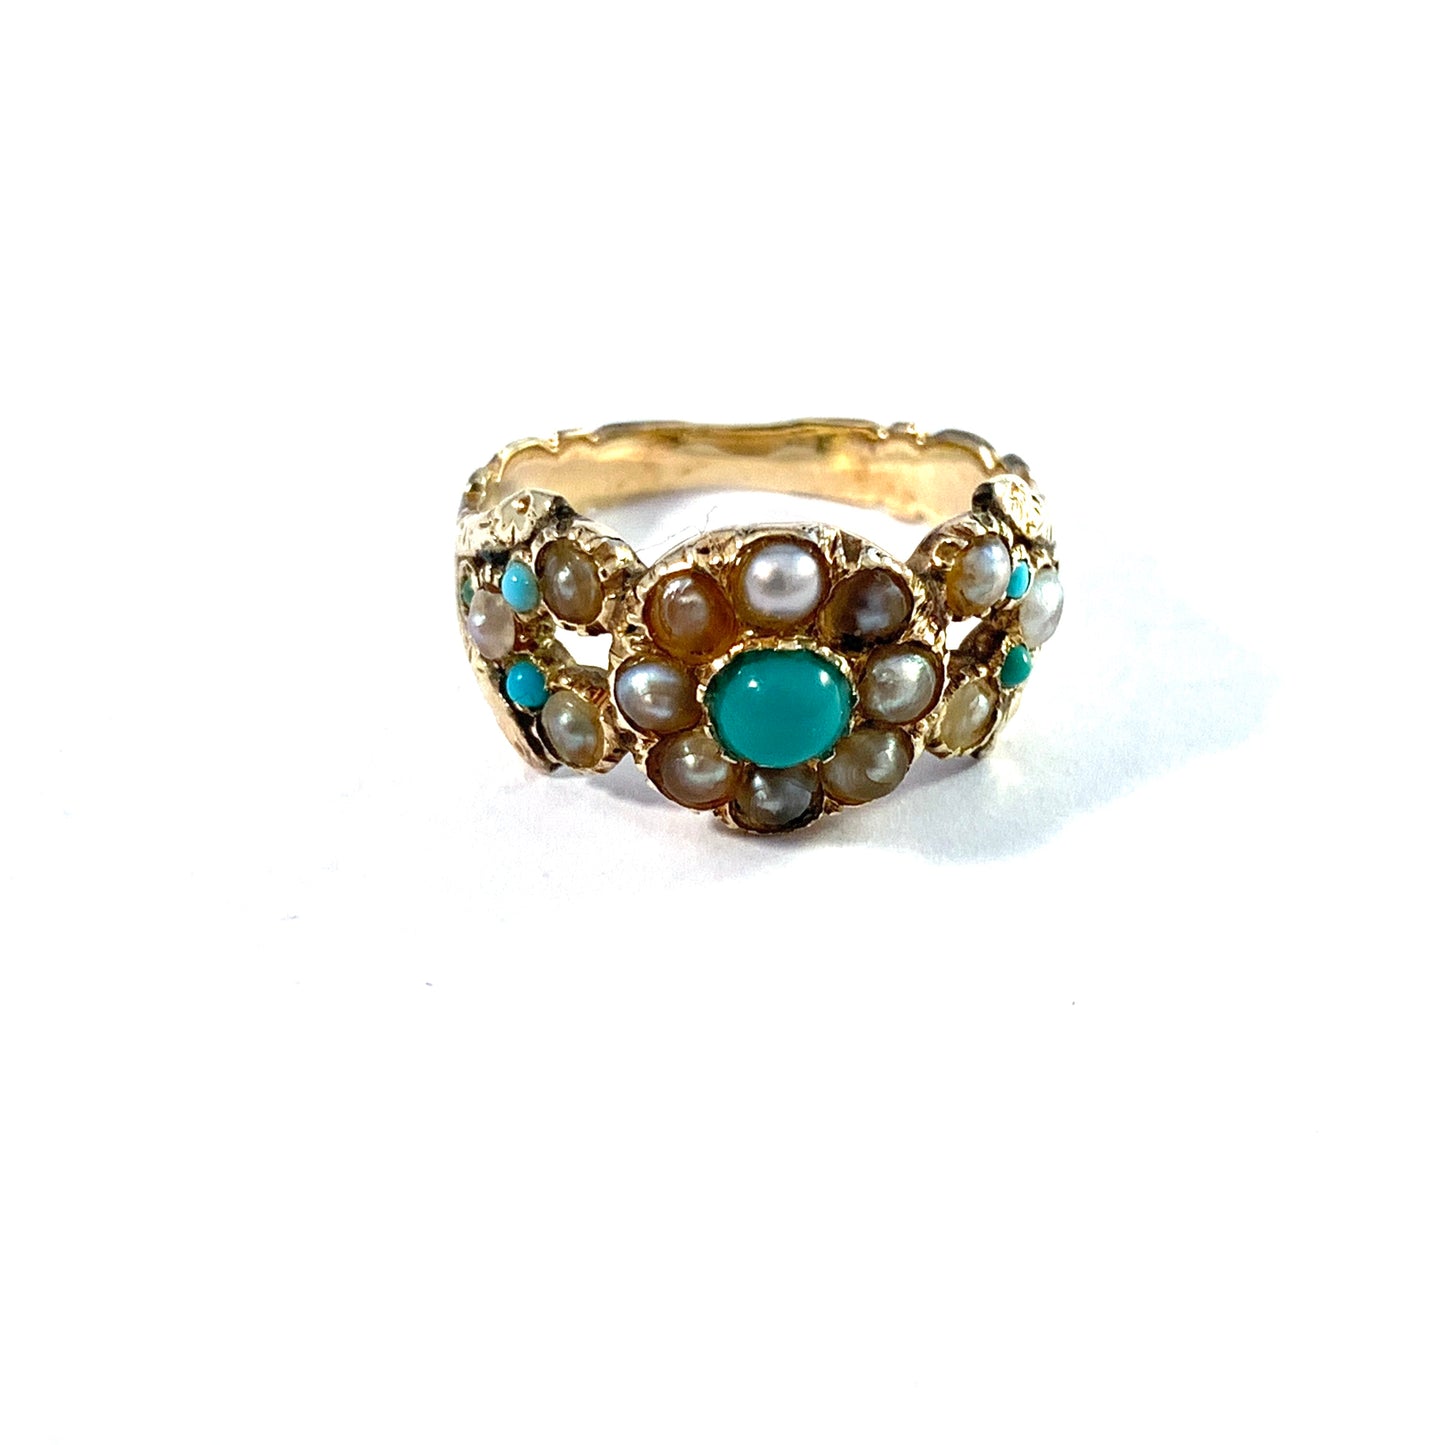 Sweden year 1822. Georgian 18k Gold Turquoise Seed Pearl Ring.